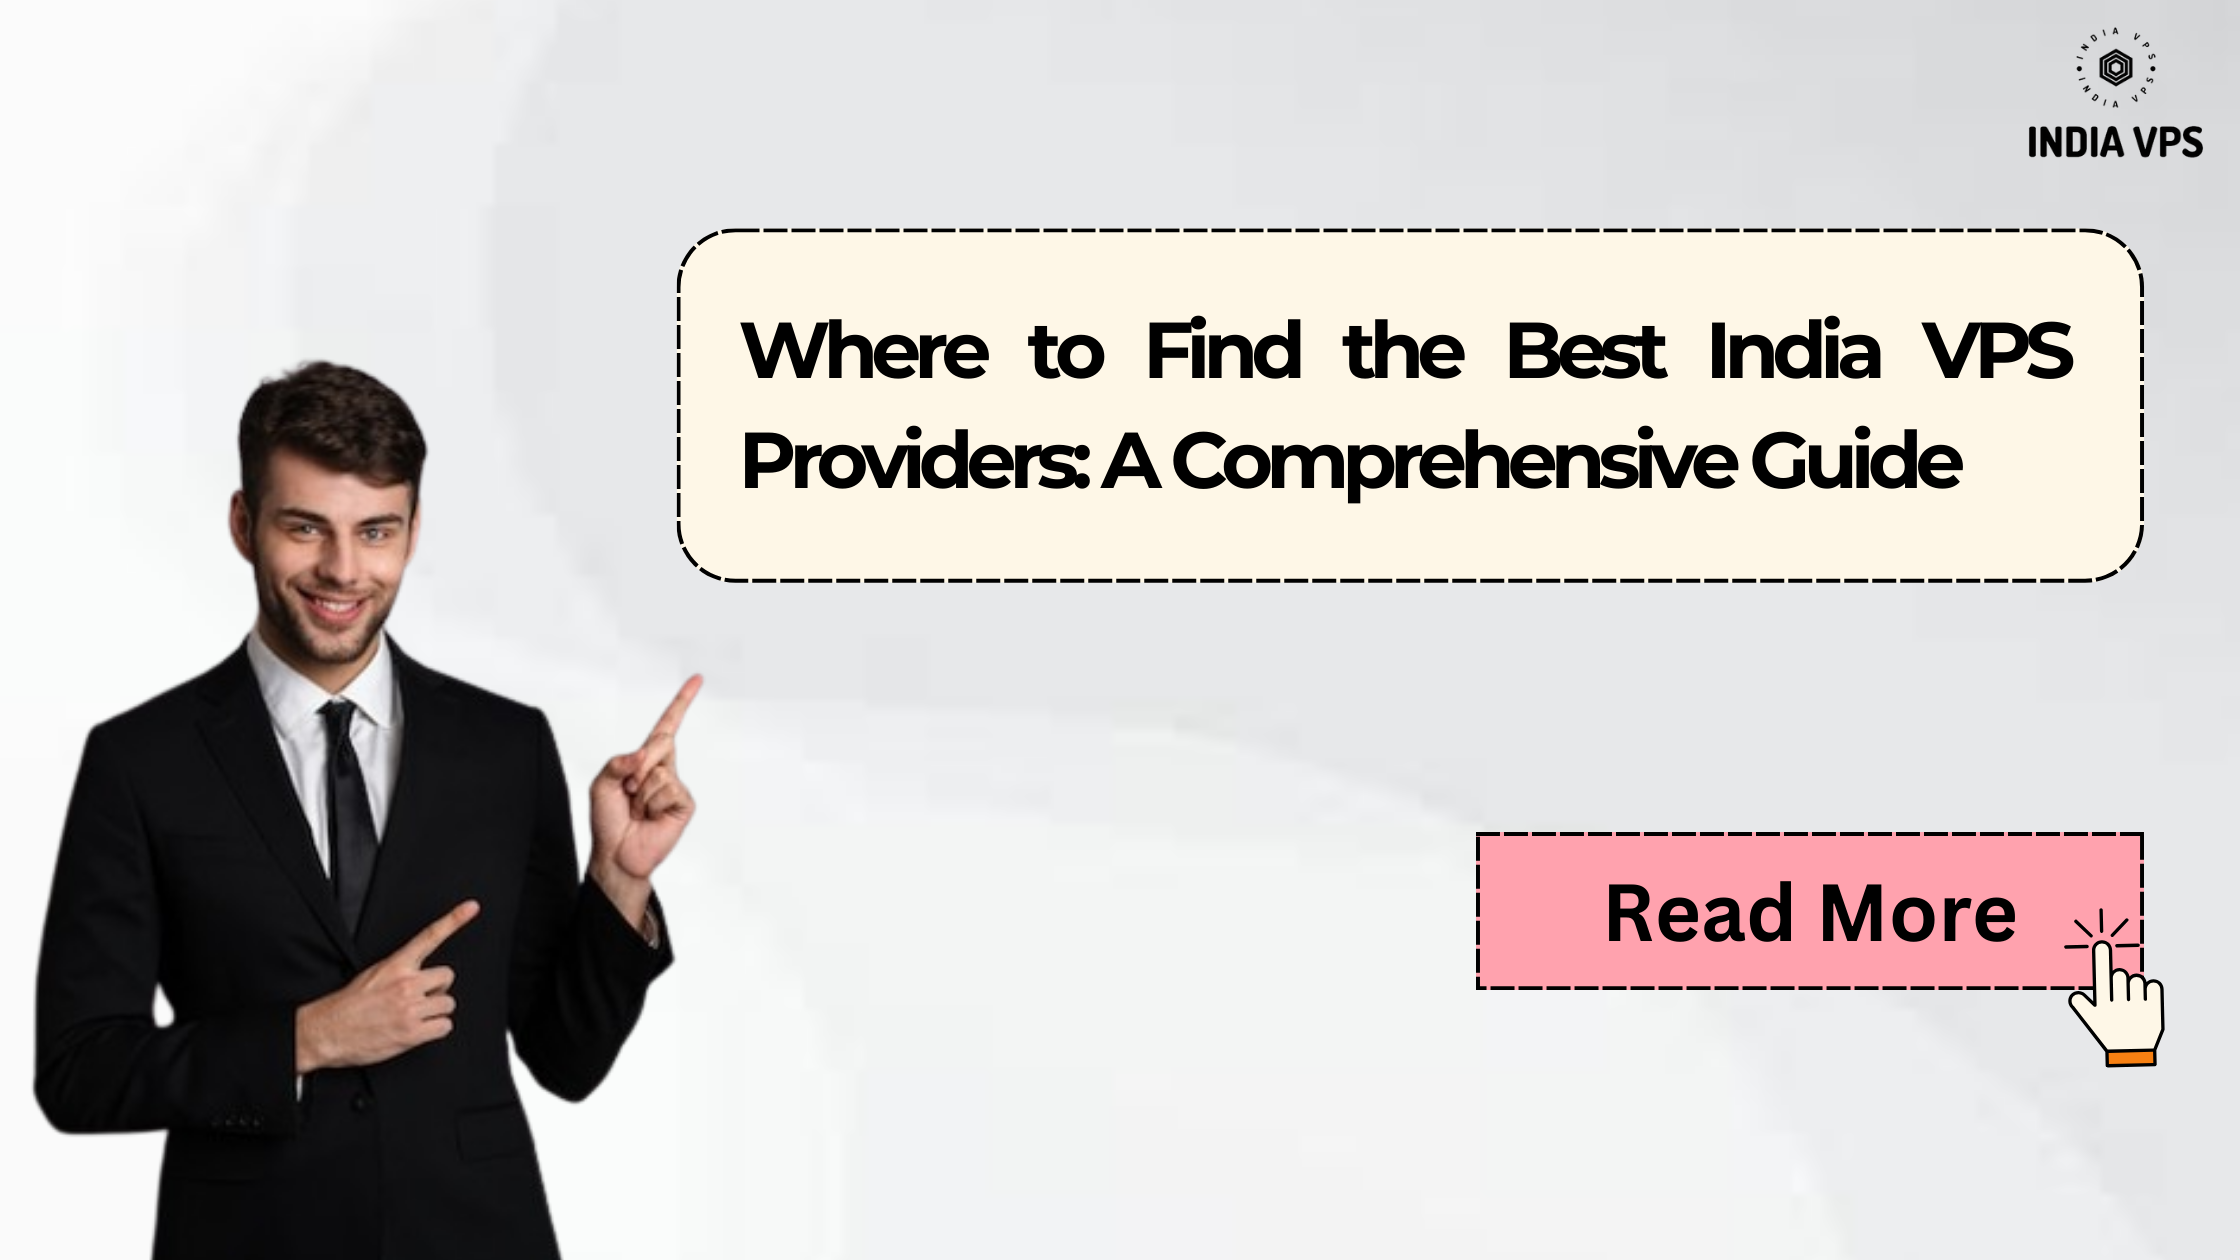 Where to Find the Best India VPS Providers A Comprehensive Guide